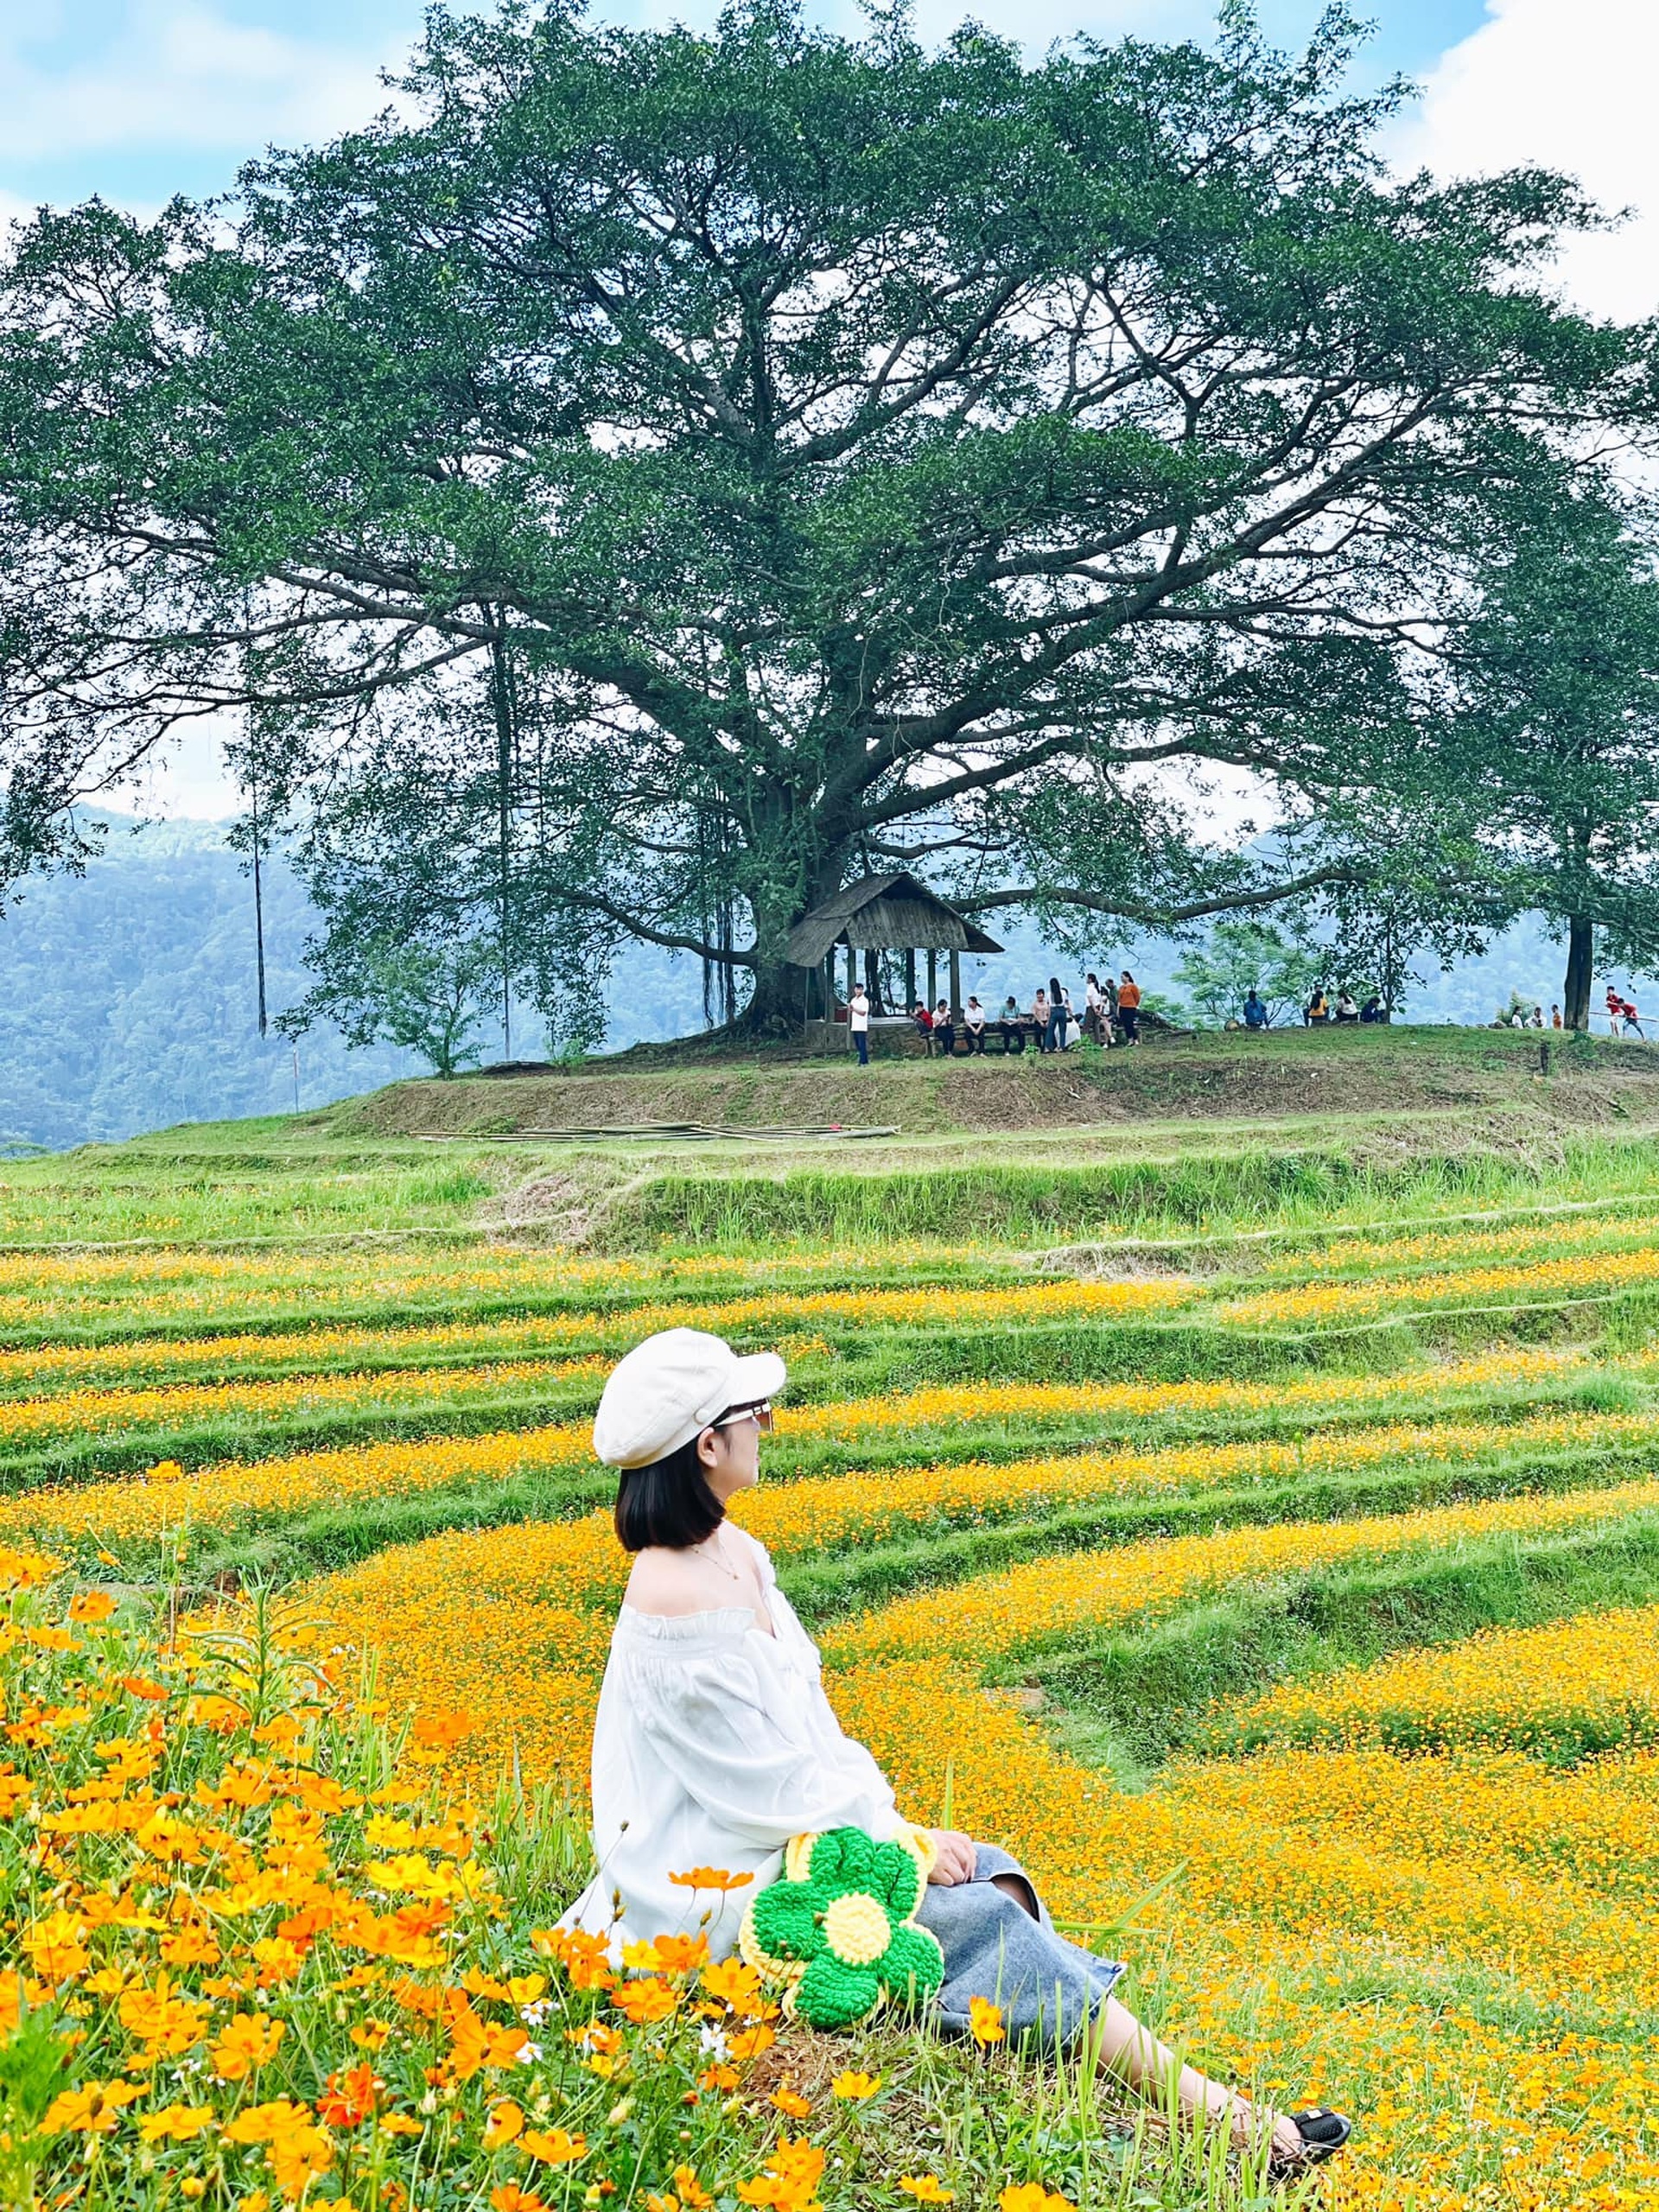 cao phong district, hoa binh province, hop phong commune, the hill is full of beautiful and romantic butterfly flowers like a movie causing “fever” in hoa binh